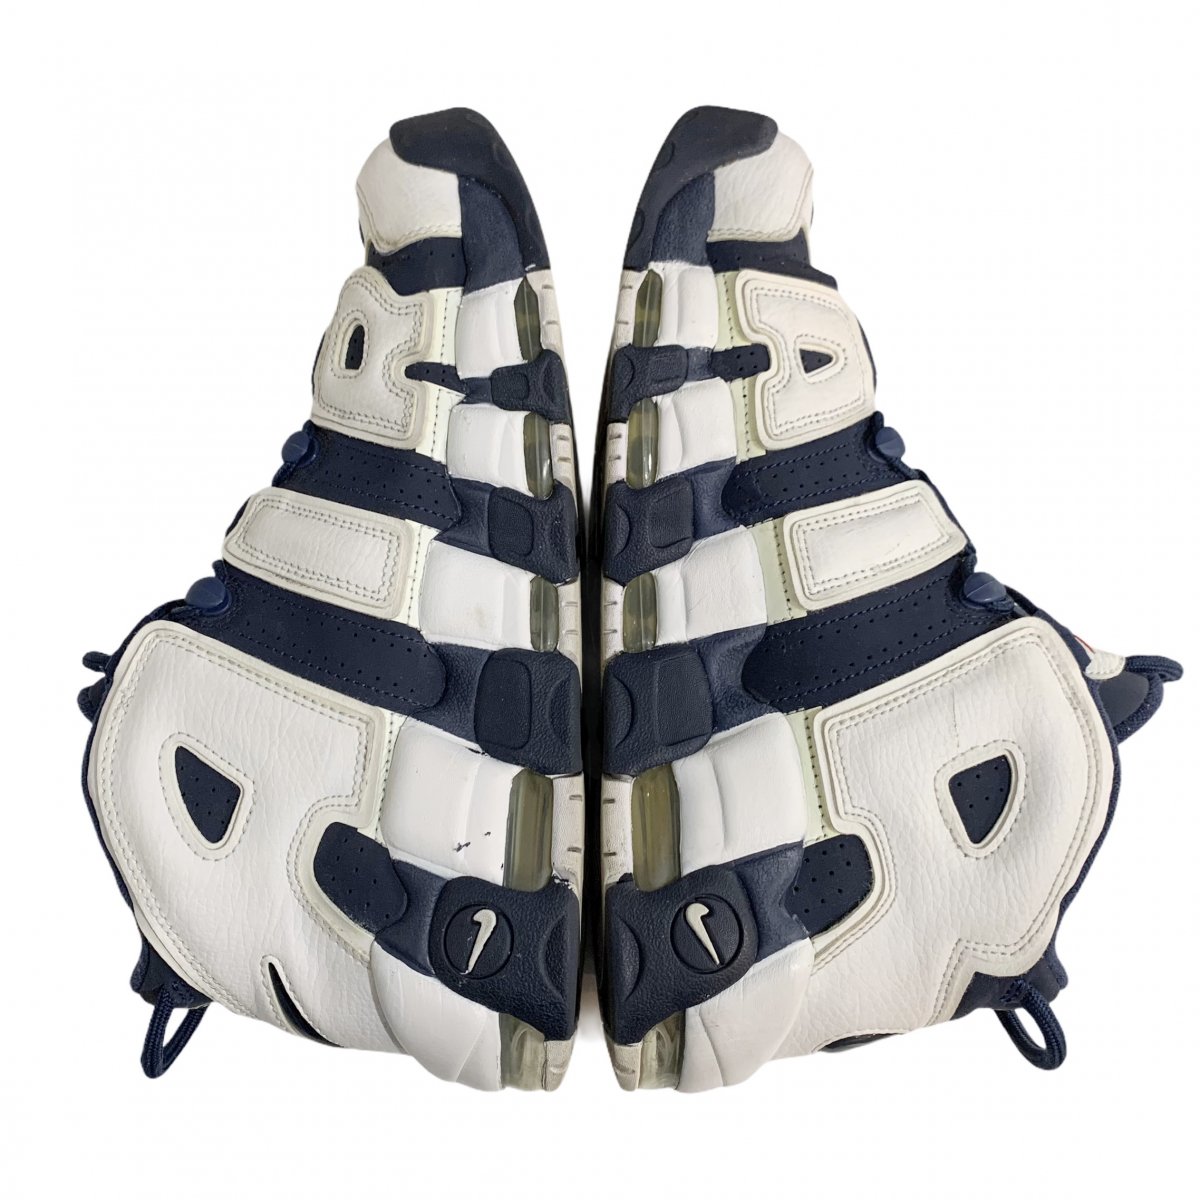 27.0 US9 AIR MORE UPTEMPO "OLYMPIC" 2020